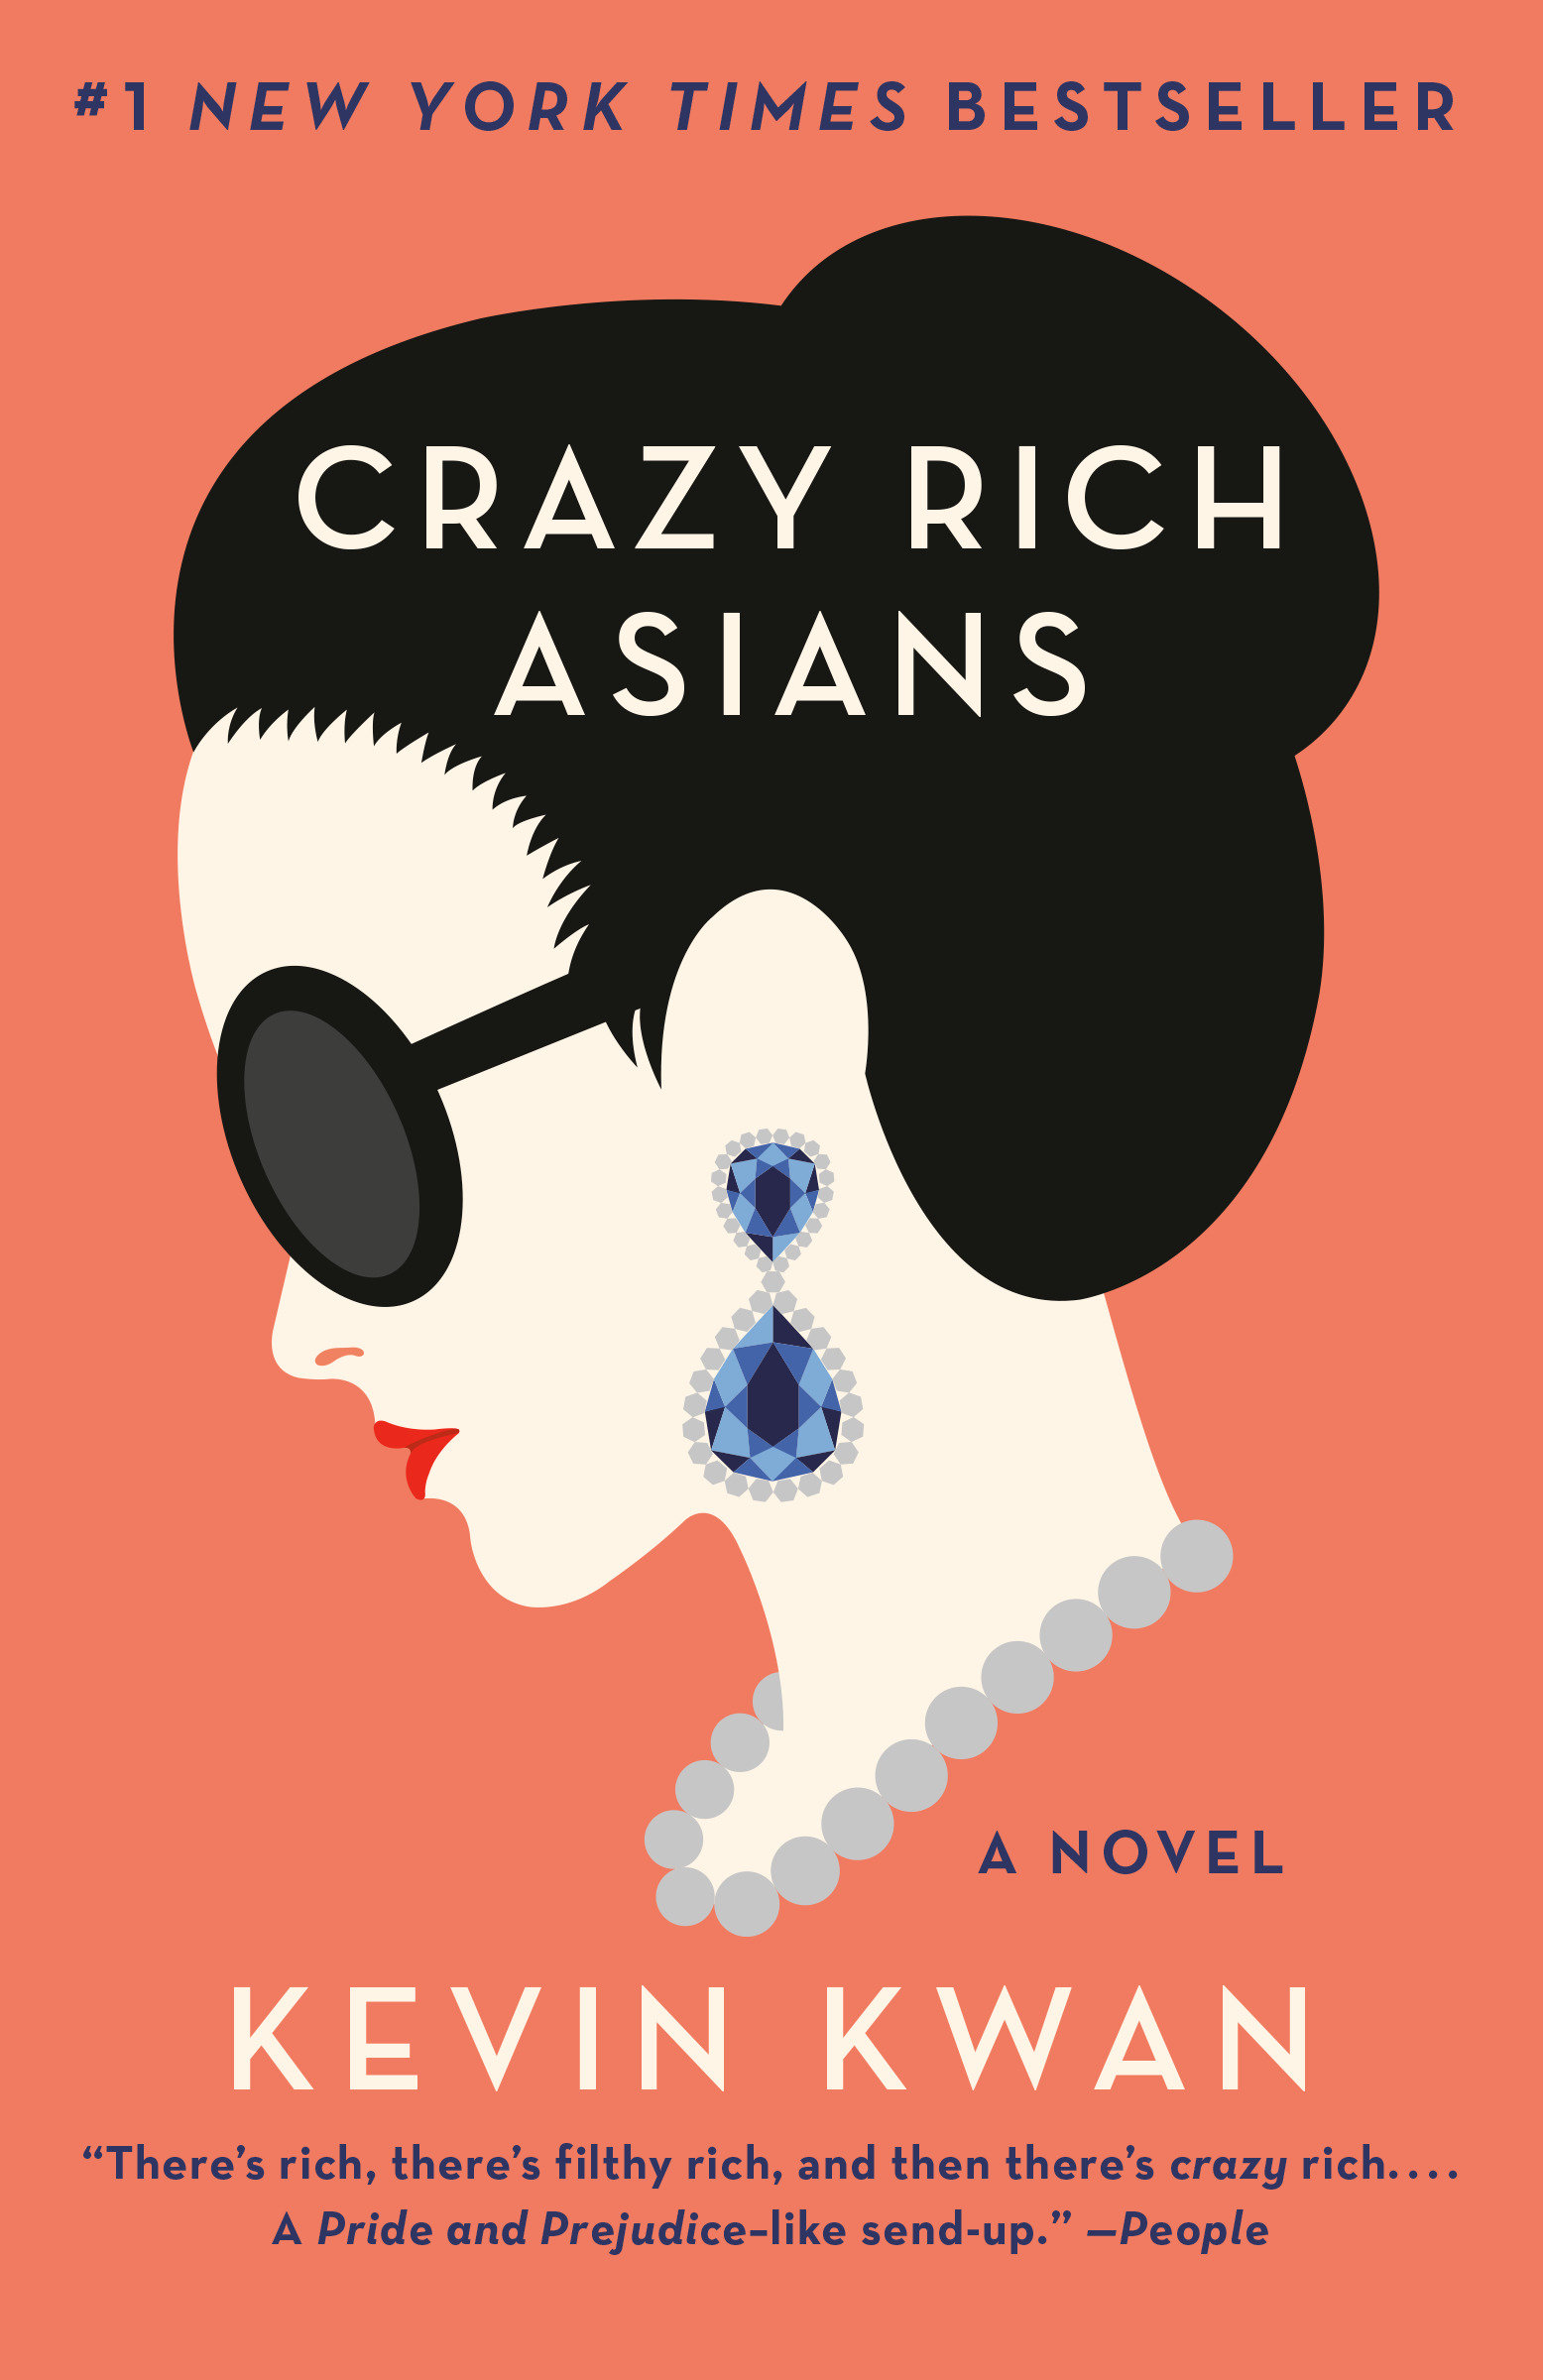 Link to Crazy Rich Asians by Kevin Kwan in the Catalog